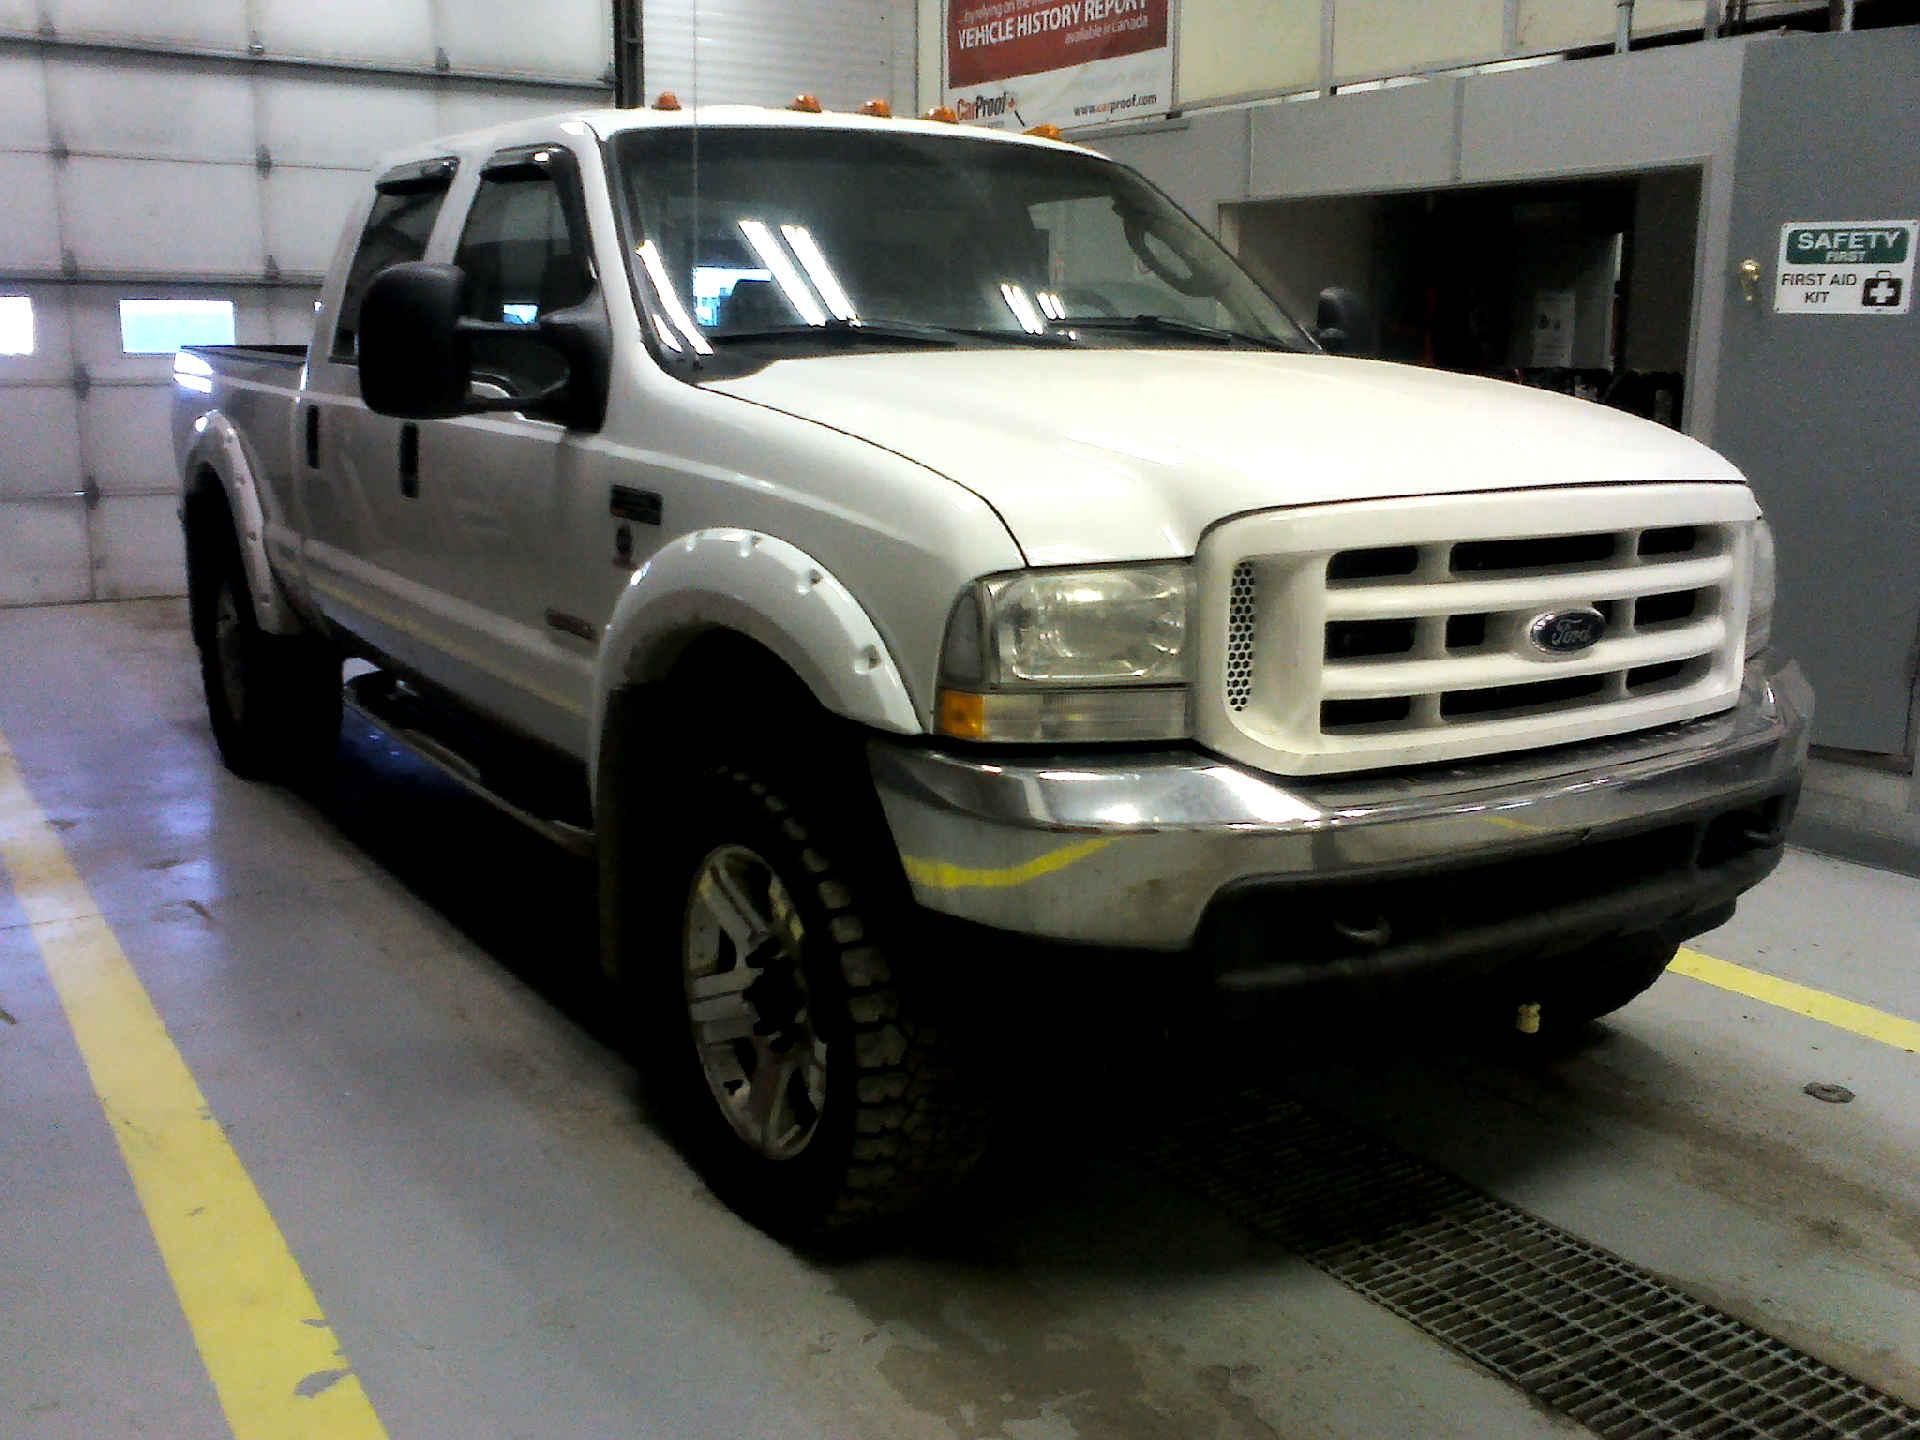 2004 FORD F-350 SD LARIAT CREW CAB LONG BED 4WD 6.0L V8 OHV 32V TURBO DIESEL AUTOMATIC SN: - Image 3 of 9